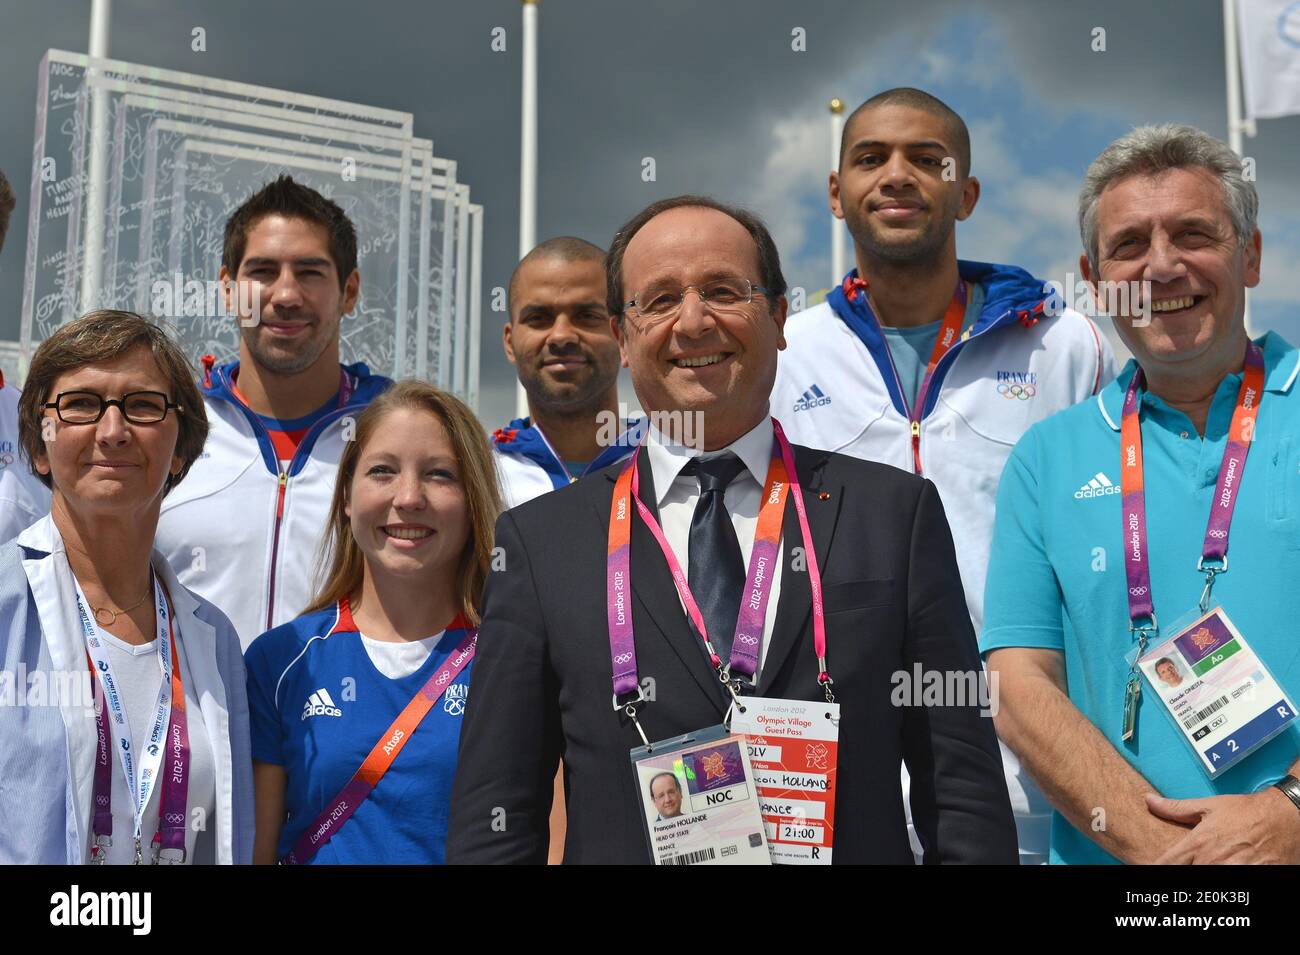 French President Francois Hollande (C) and French Sports Minister Valerie Fourneyron (L) pose with French athletes Nikola Karabatic (L, 2nd row), silver medalist Celine Goberville (2ndL), baskettball players Tony Parker (C) and Nicolas Batum (2ndR) and handball headcoach Claude Onesta (R) on July 30, 2012 at Olympic village in London, during the London 2012 Olympic Games. Photo by Gabriel Bouys/Pool/ABACAPRESS.COM Stock Photo